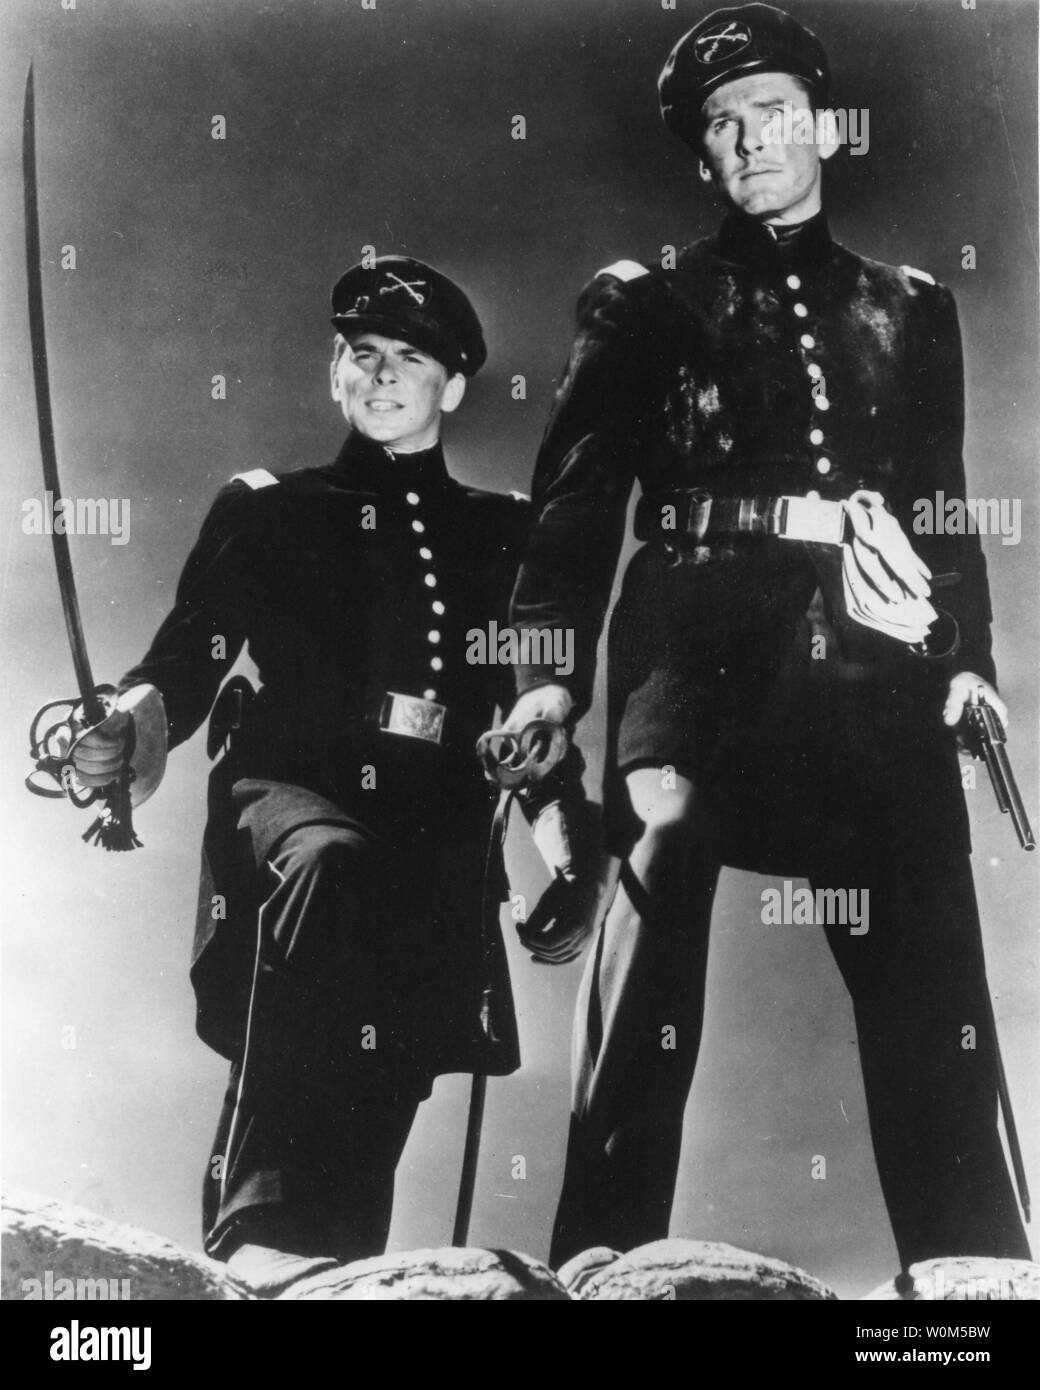 Ronald Reagan (L) is George Armstrong Custer and Errol Flynn is Jeb Stuart in this promotional still from the 1940 movie 'Santa Fe Trail.' Reagan, the 40th President of the United States of America, was instrumental in bringing about the collapse of communism and an end to the Cold War. The former President is now 92 and has been suffering from alzheimer's for over ten years. (UPI/File) Stock Photo